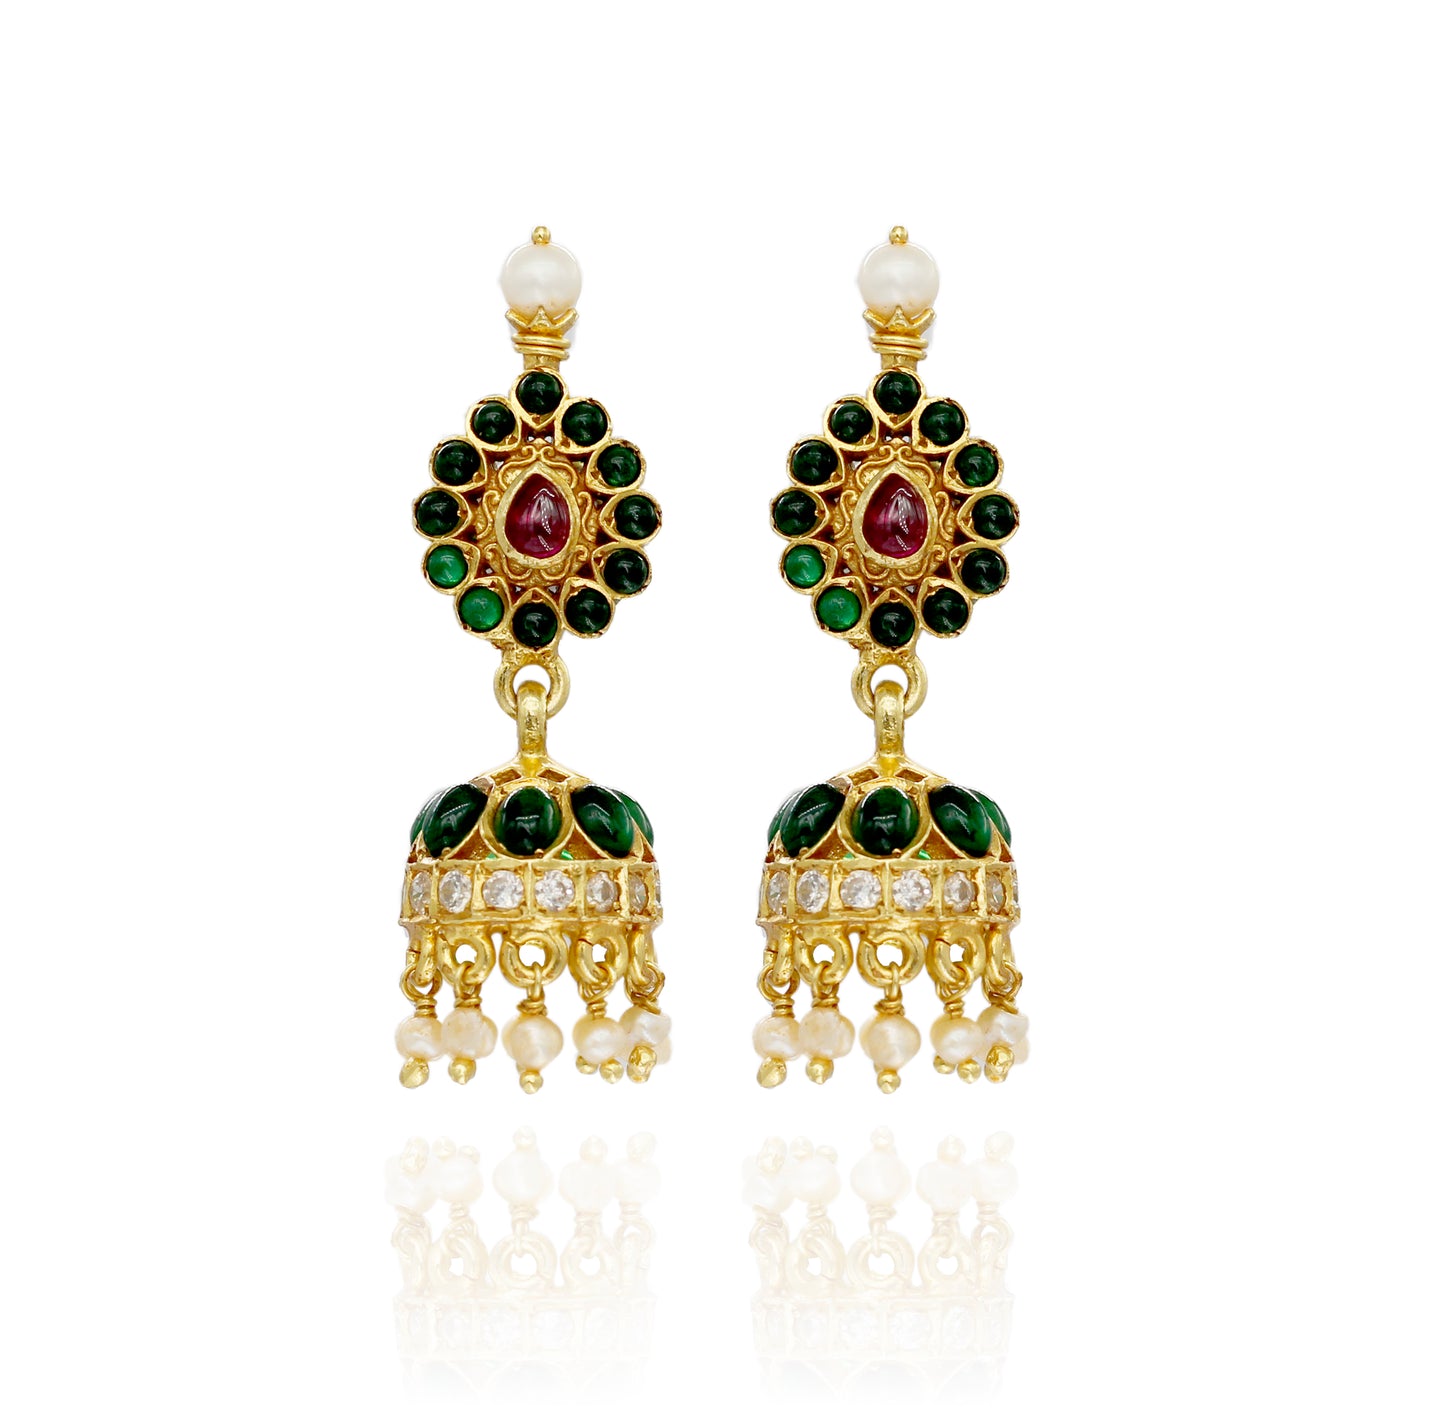 EARRINGS:- 92.5 STERLING SILVER GOLD PLATED WITH PINK & GREEN ONYX , CULTURED & FRESH WATER PEARLS.